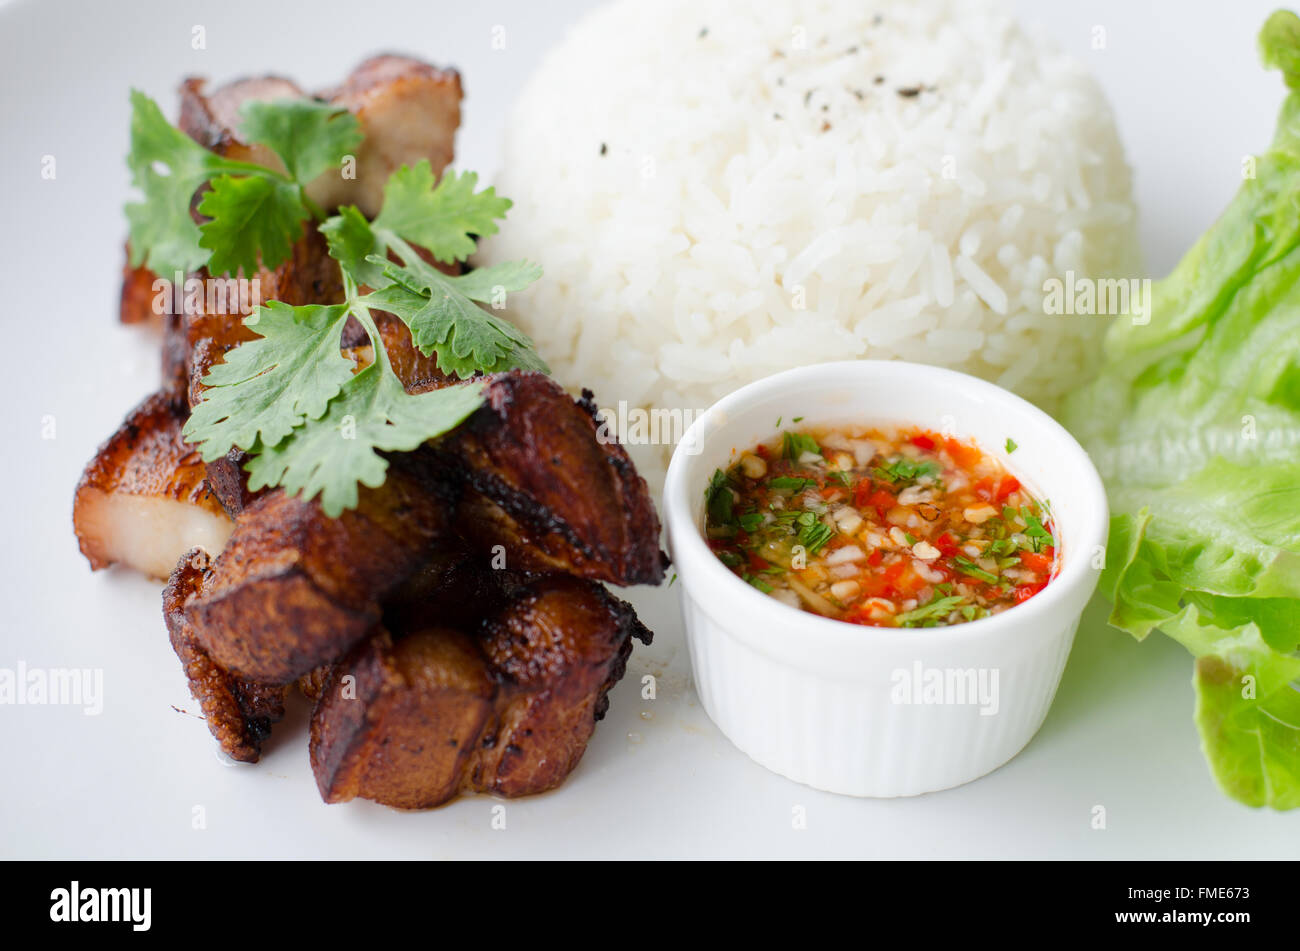 Deep fried pork with rice and chili sauce Stock Photo